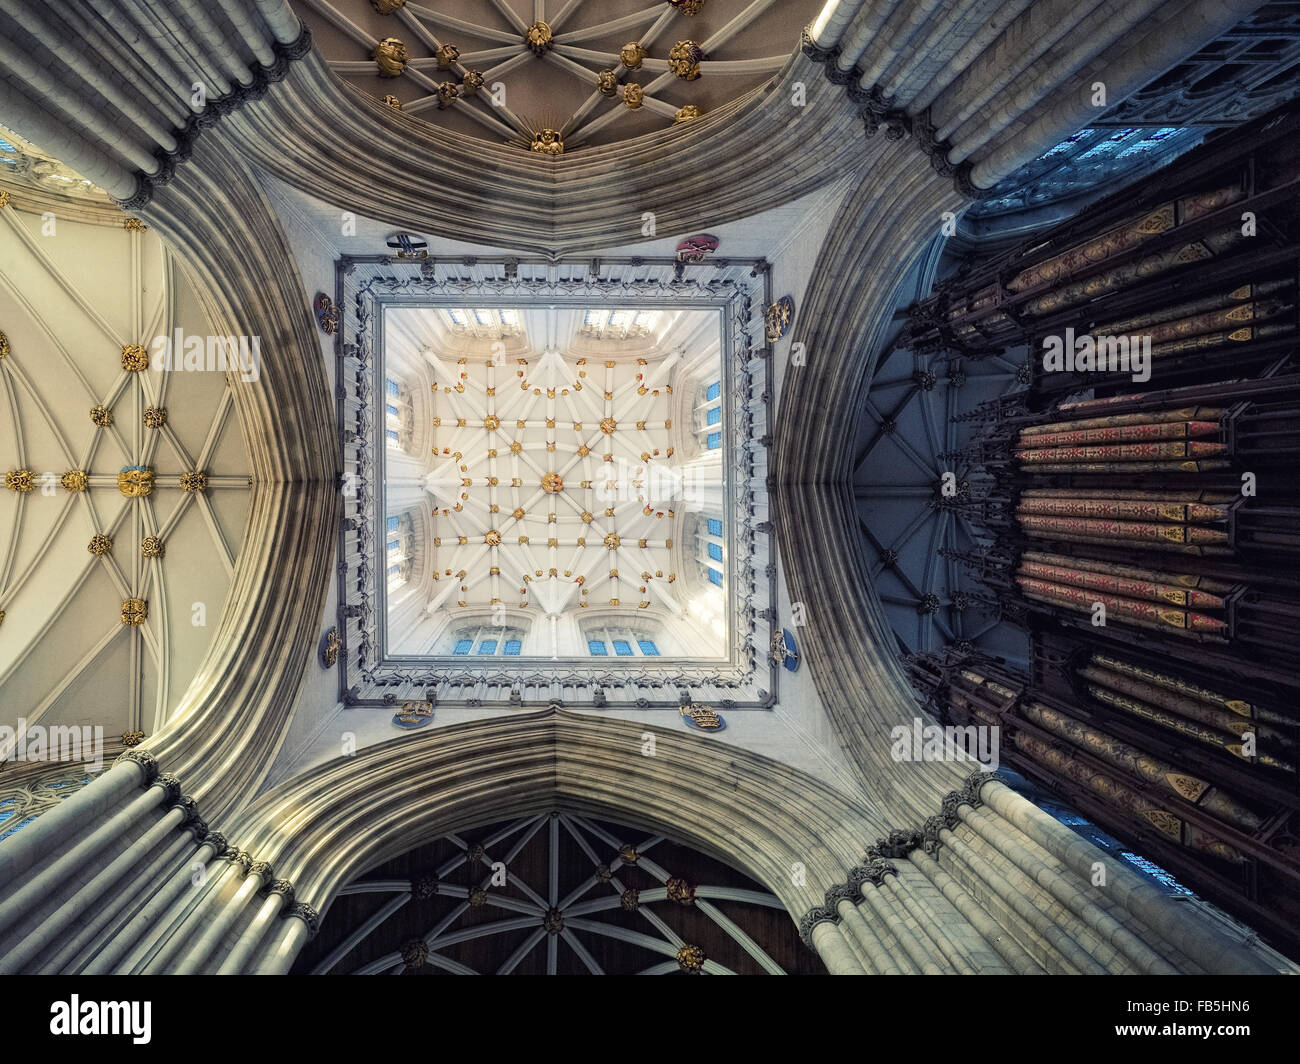 View of the ceiling directly below the tower in York Minster Cathedral, York, England. Stock Photo